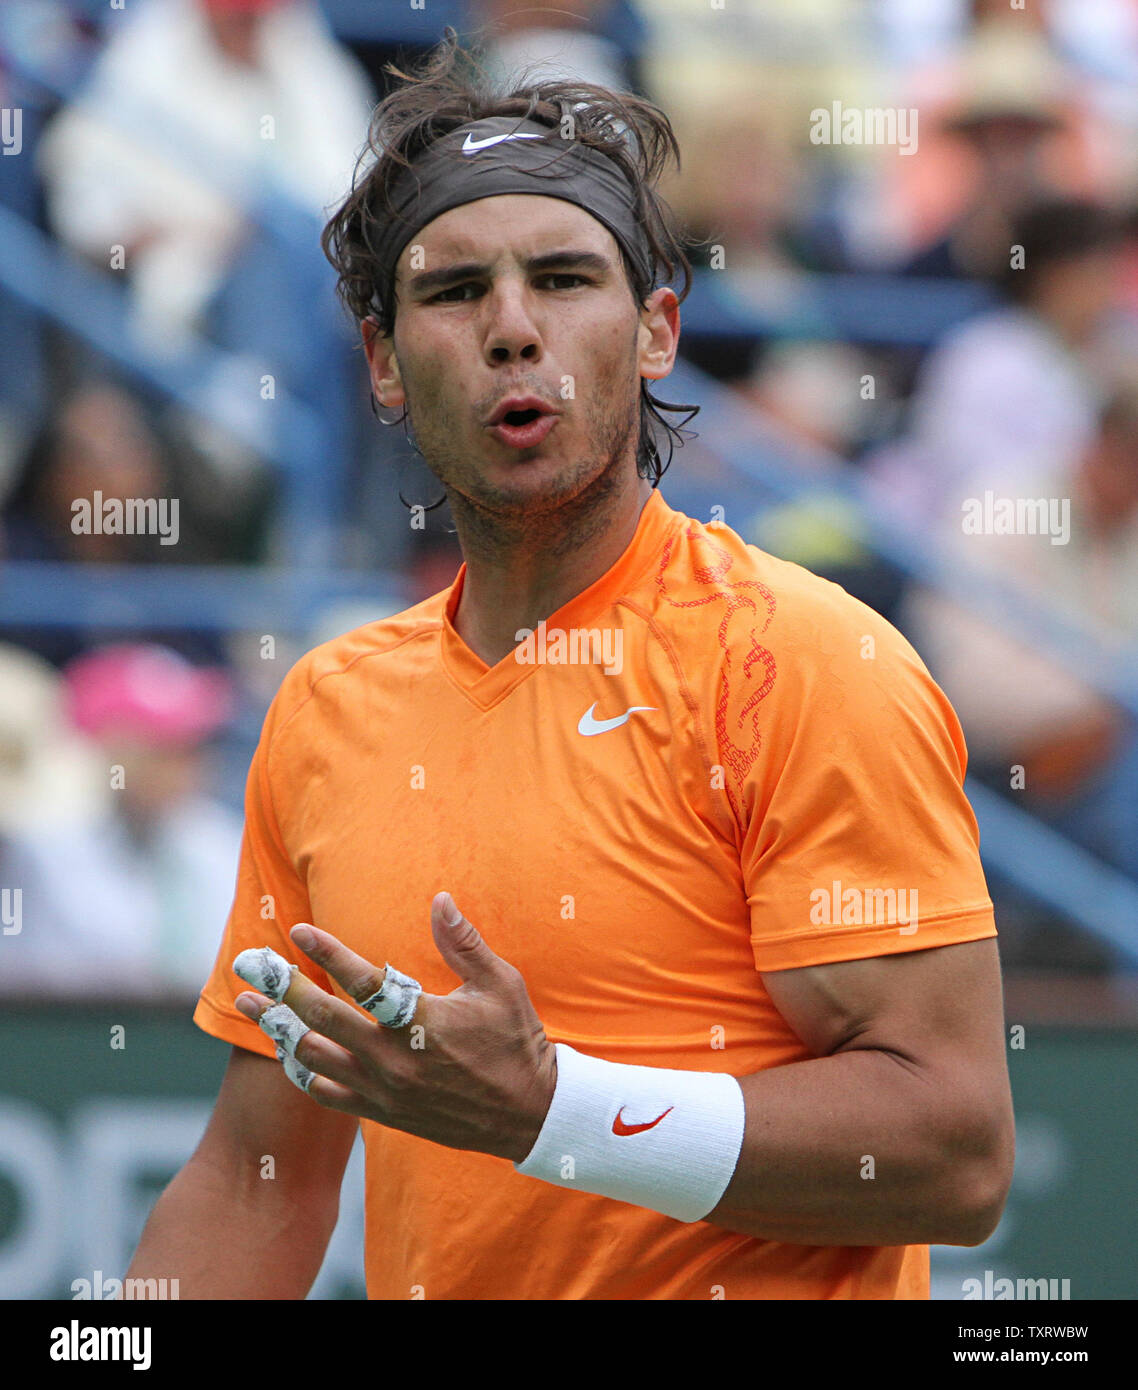 Spaniard Rafael Nadal reacts after a shot during his mens final match against Serbian Novak Djokovic at the BNP Paribas Open in Indian Wells, California on March 20, 2011.  Djokovic defeated Nadal 4-6, 6-3, 6-2 to win the tournament.   UPI/David Silpa Stock Photo